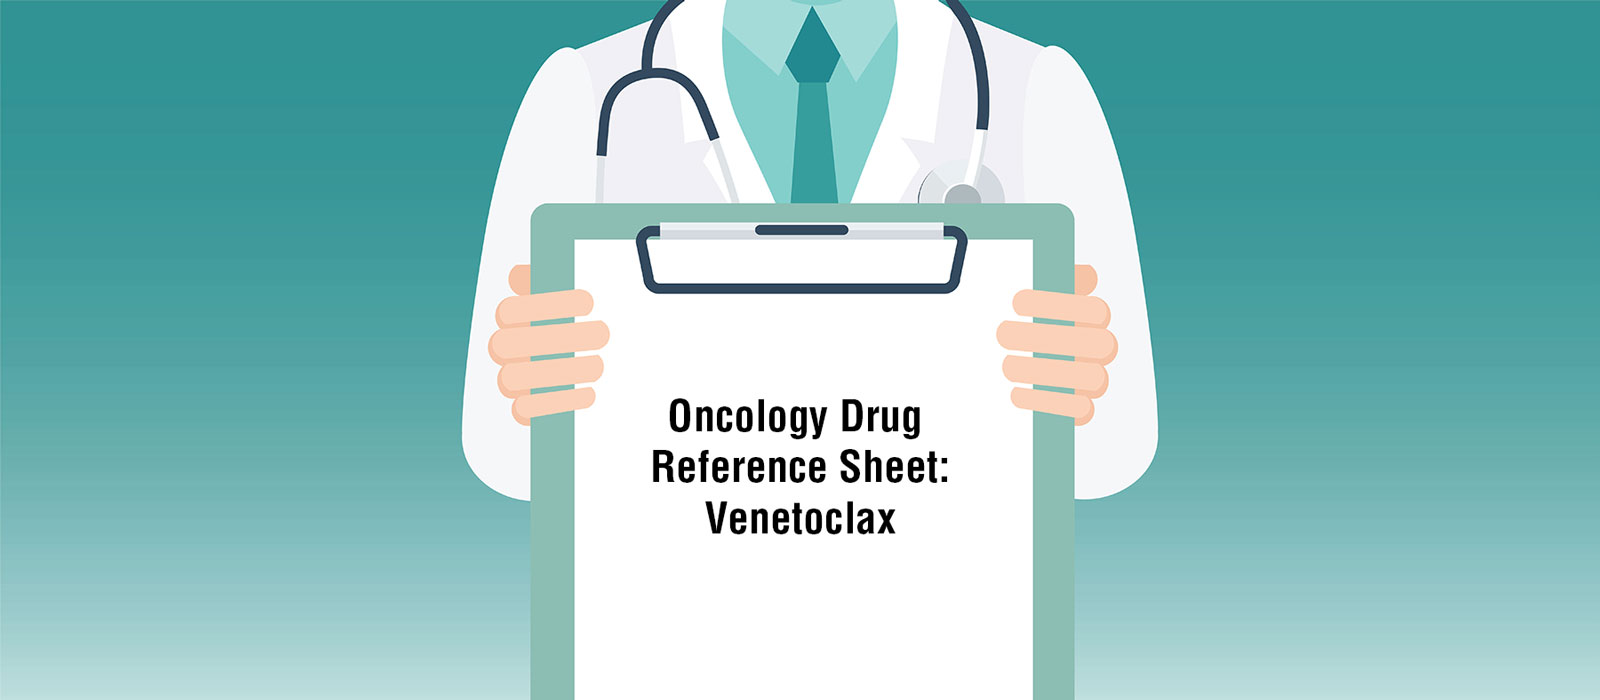 Oncology Drug Reference Sheet: Venetoclax